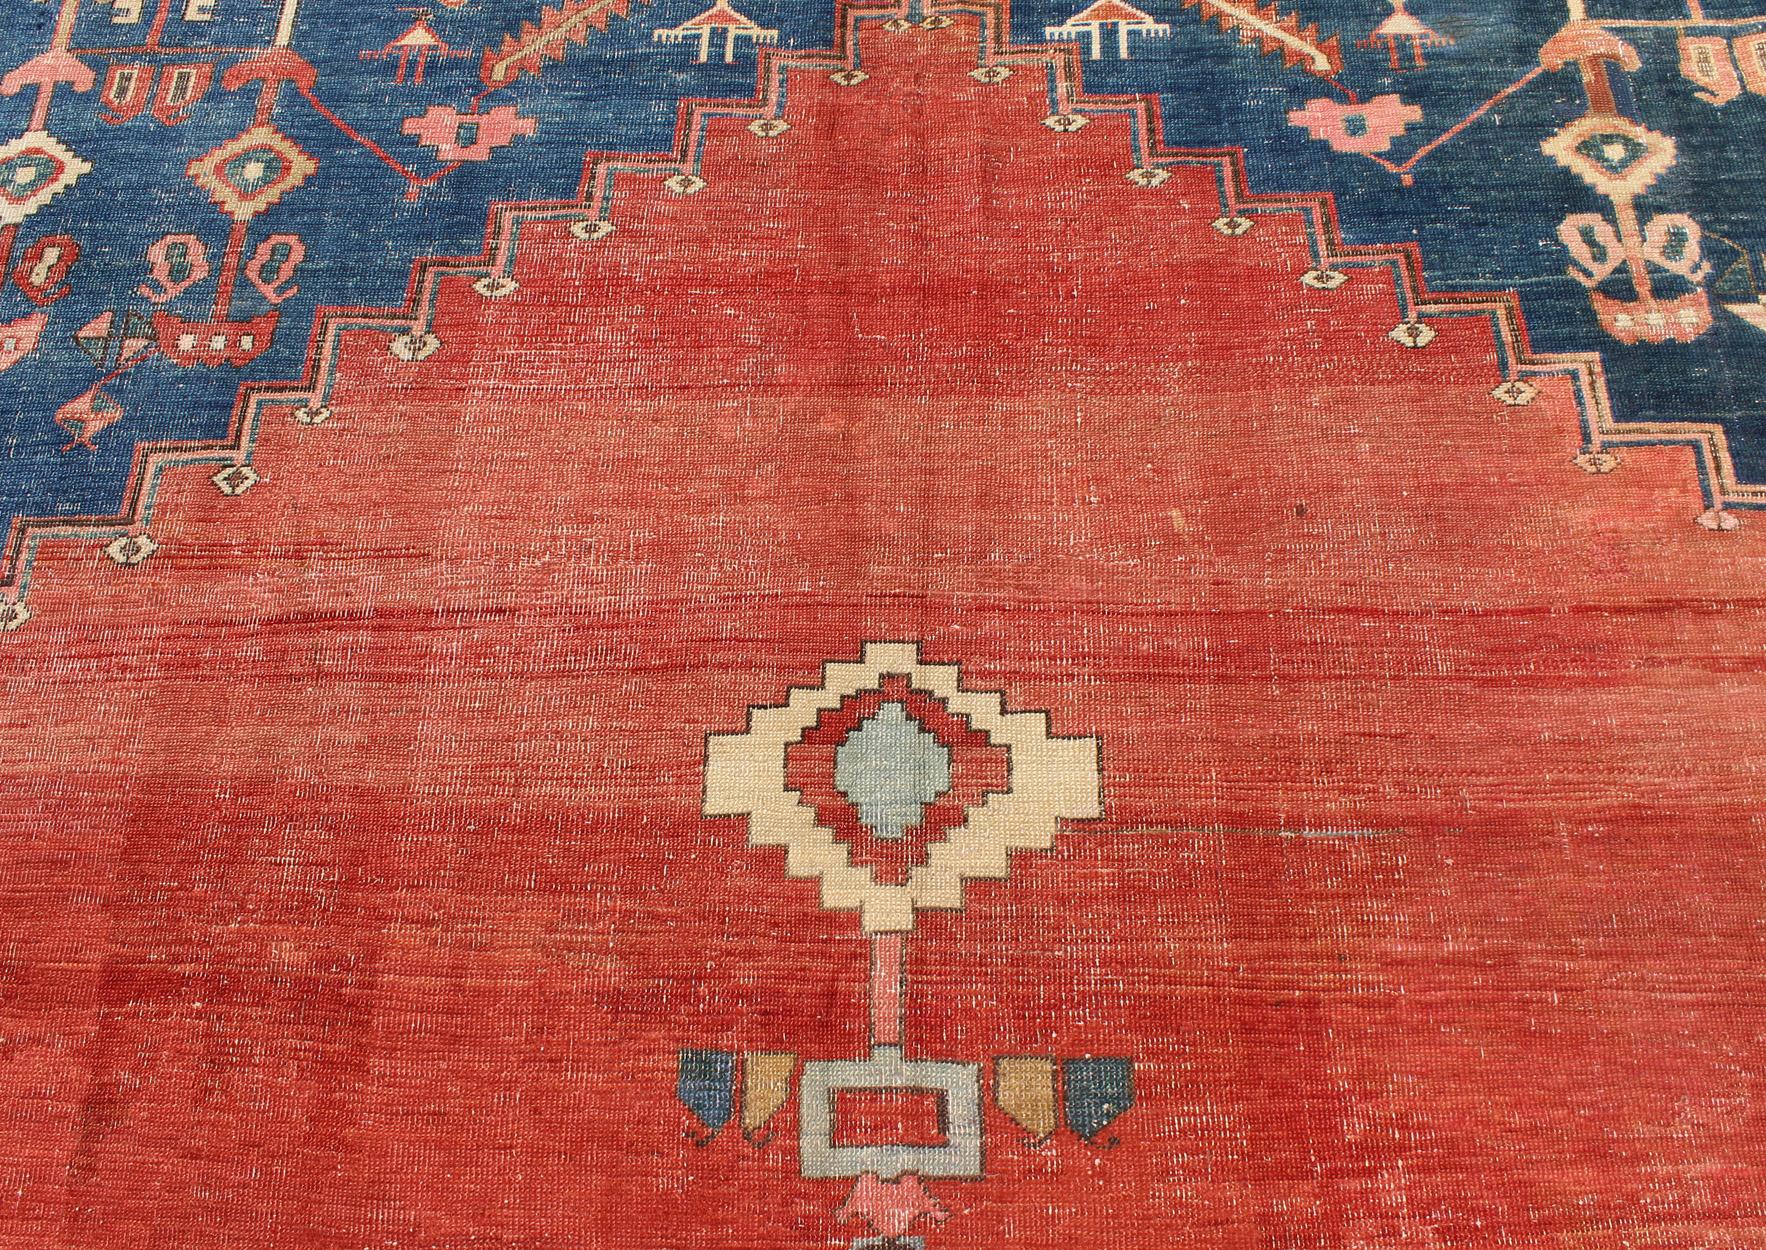 Finely Woven 19th Century Antique Persian Bakhshaiesh Rug in Rust Red and Blue For Sale 6